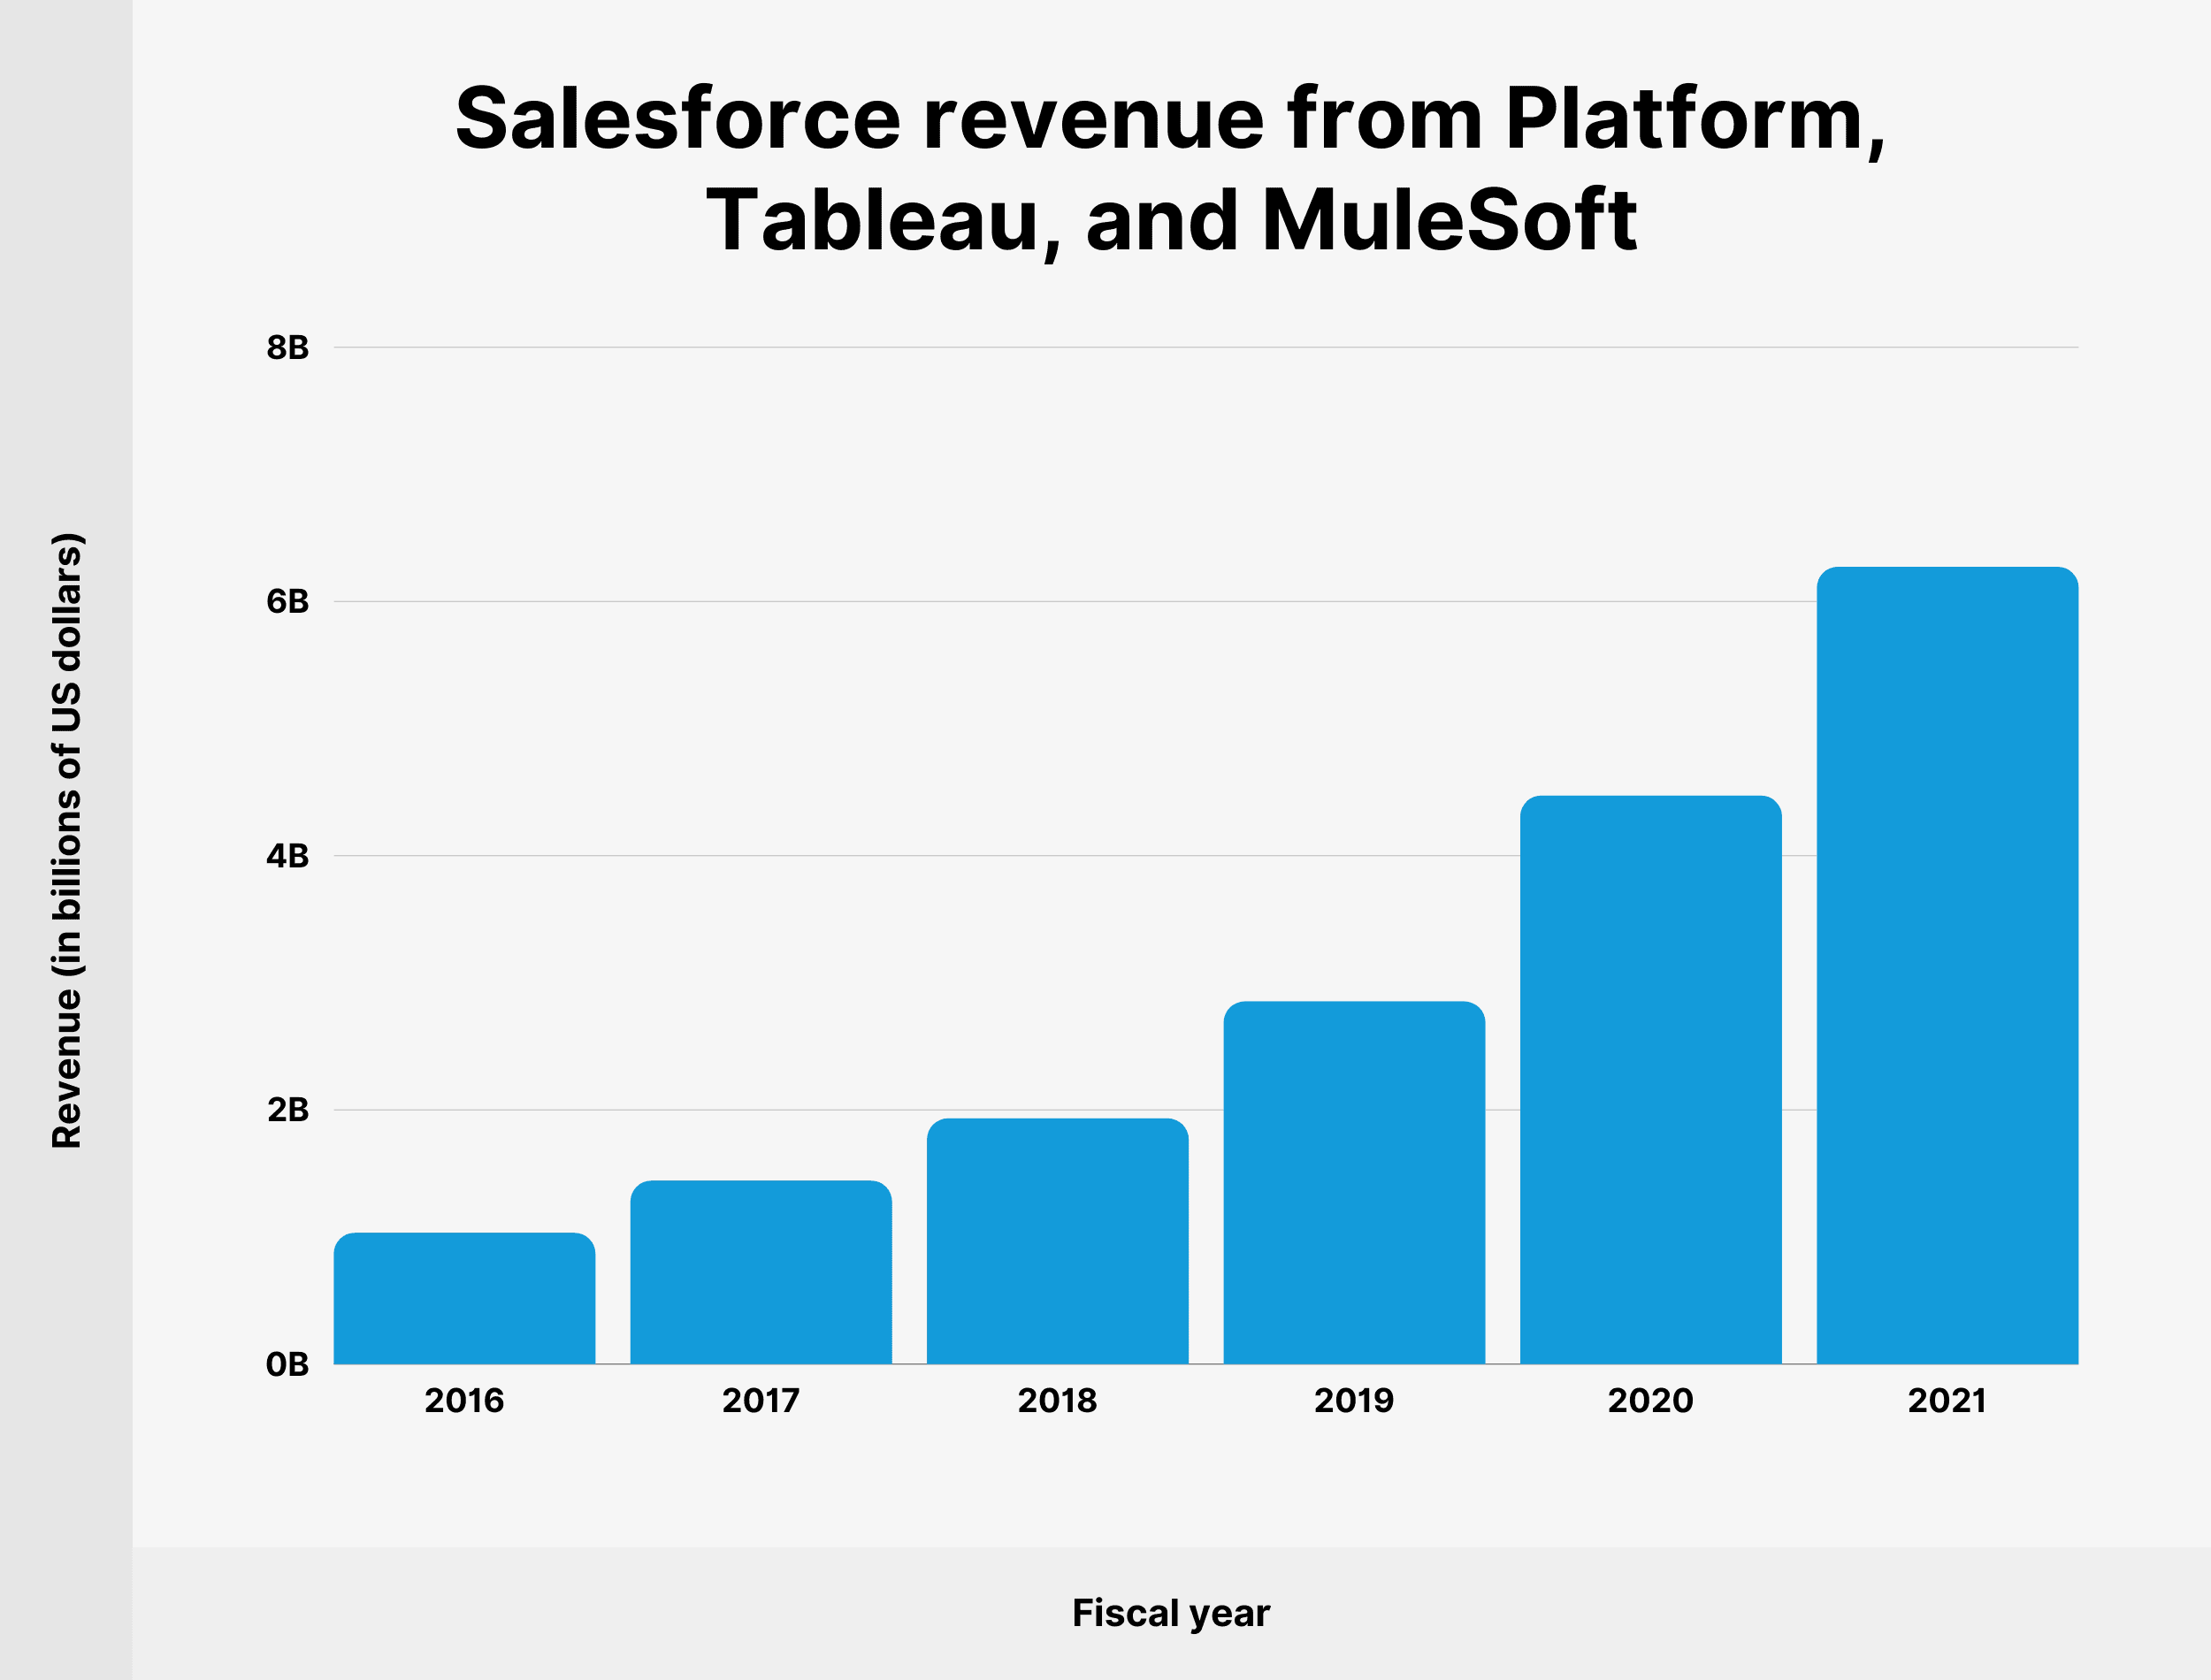 Salesforce revenue from Platform, Tableau, and MuleSoft